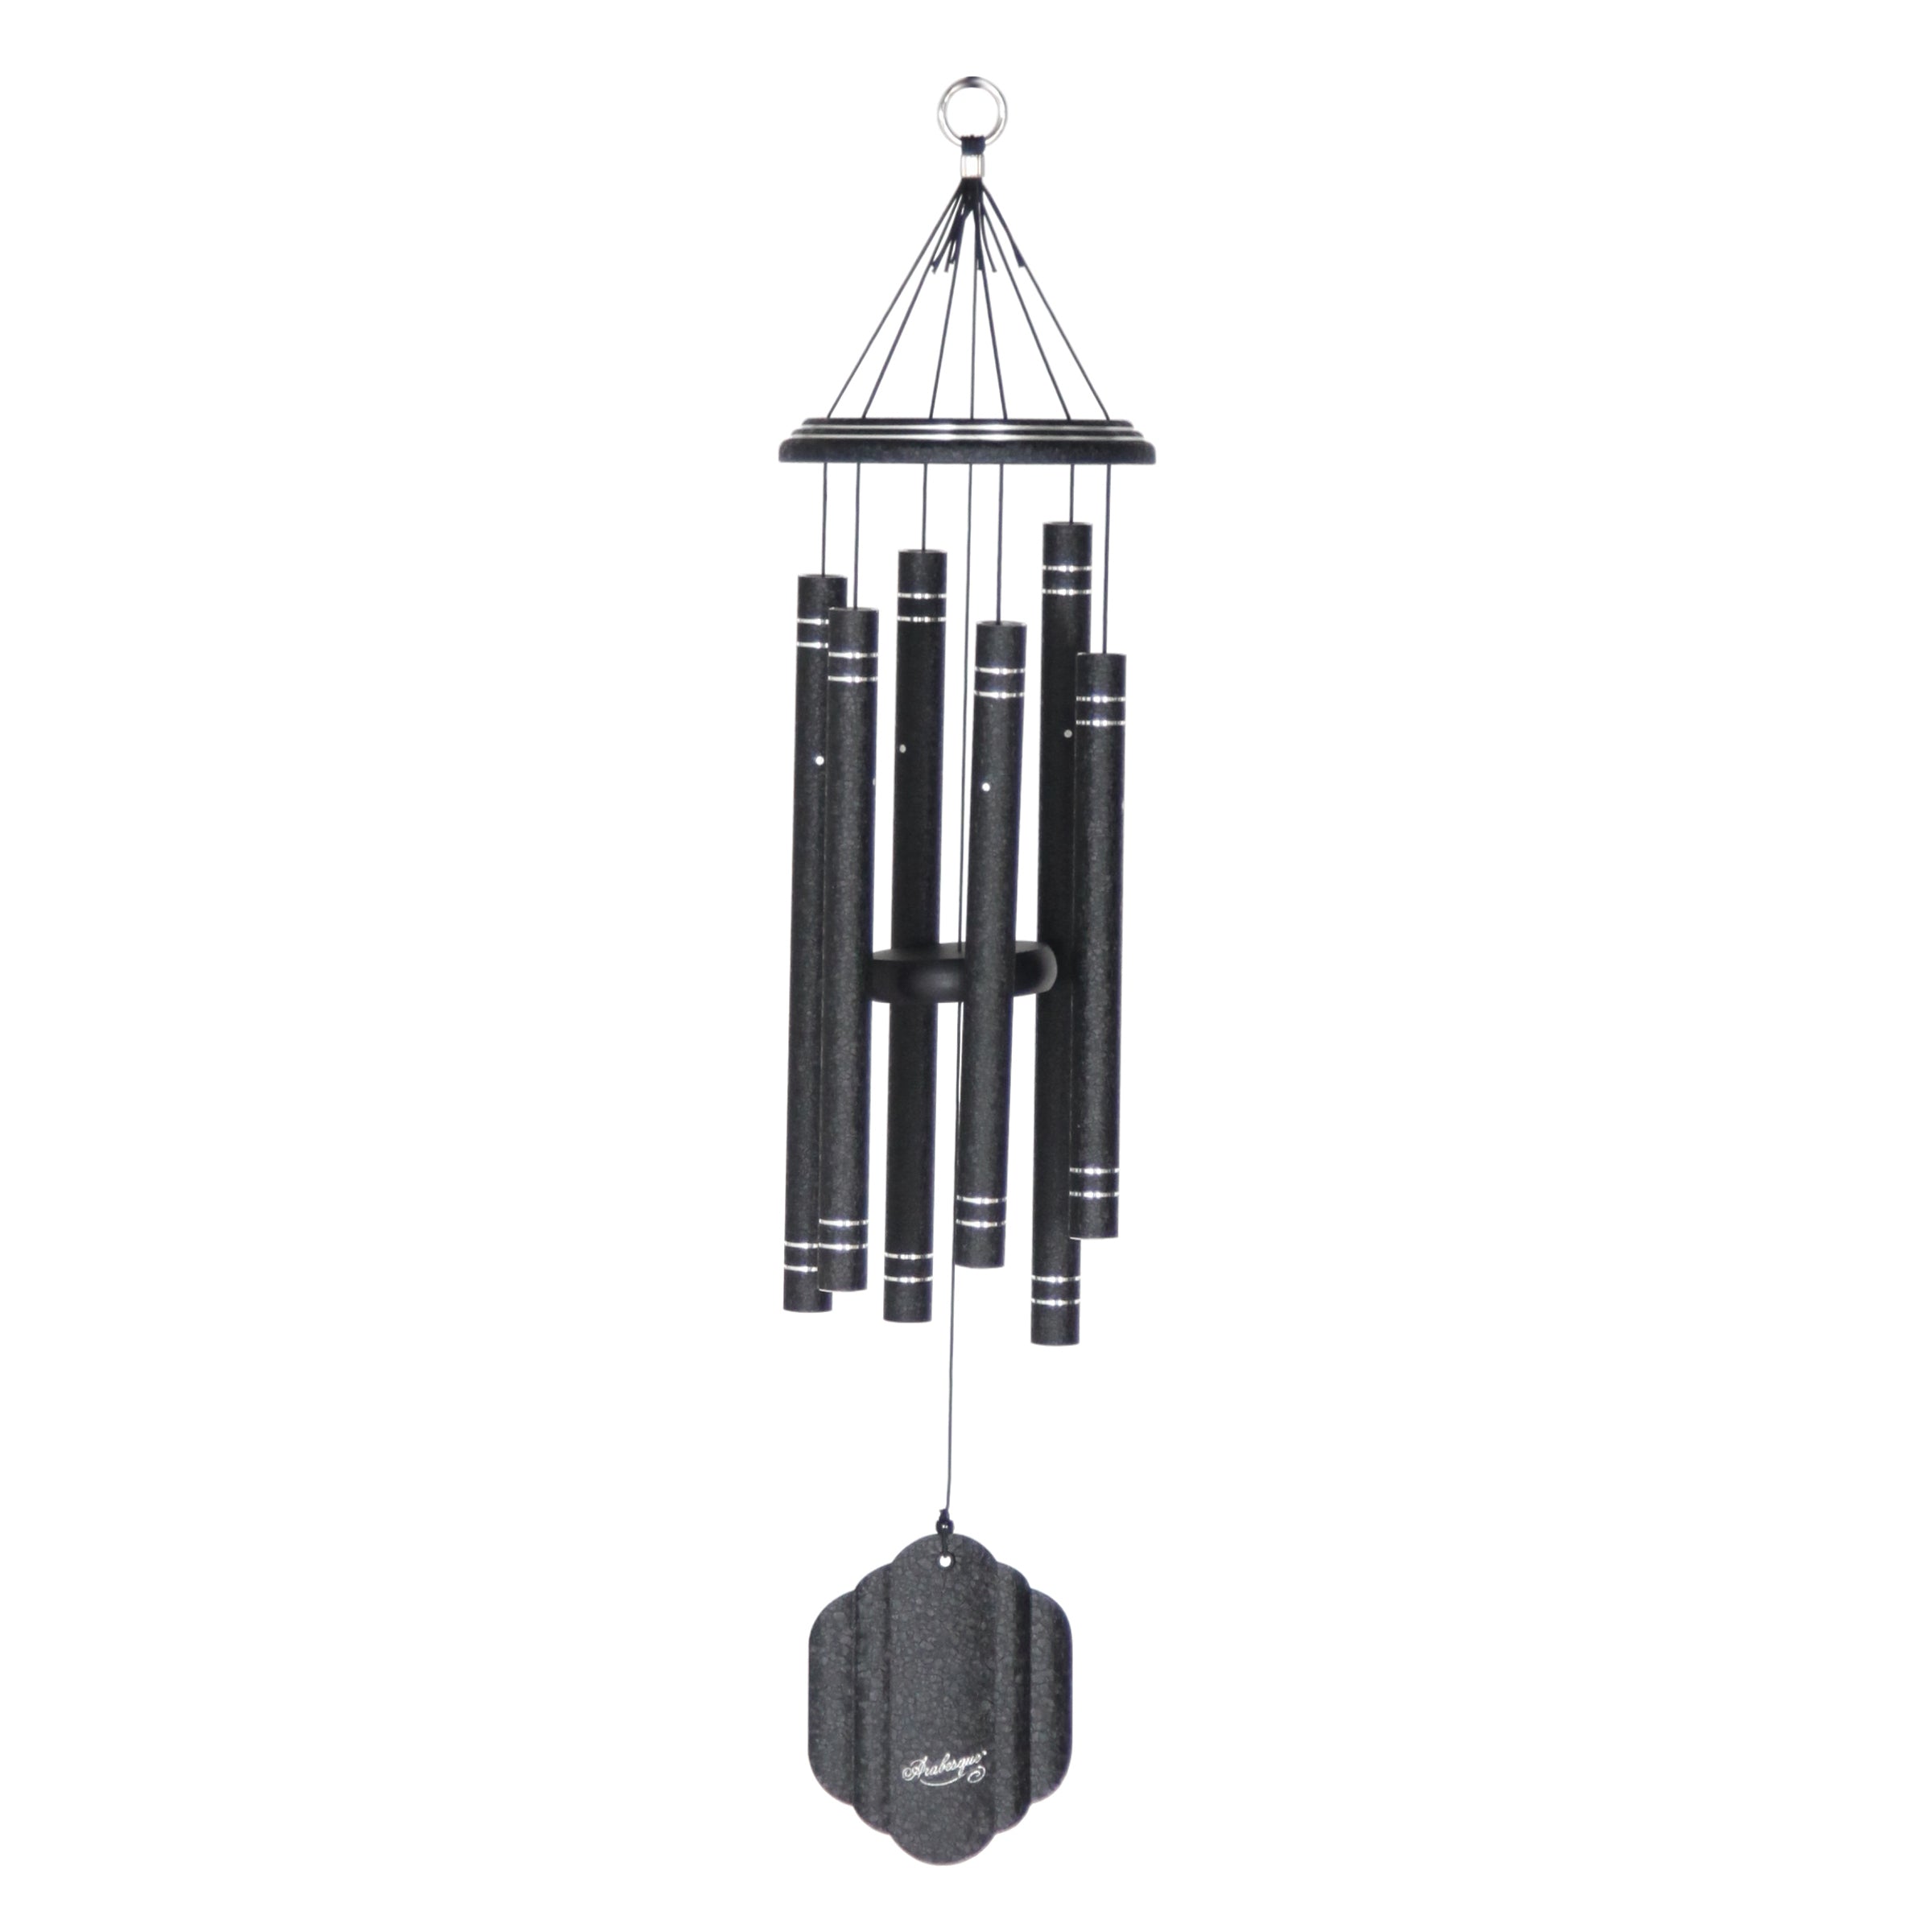 Wind River Arabesque ® 32-inch wind chimes